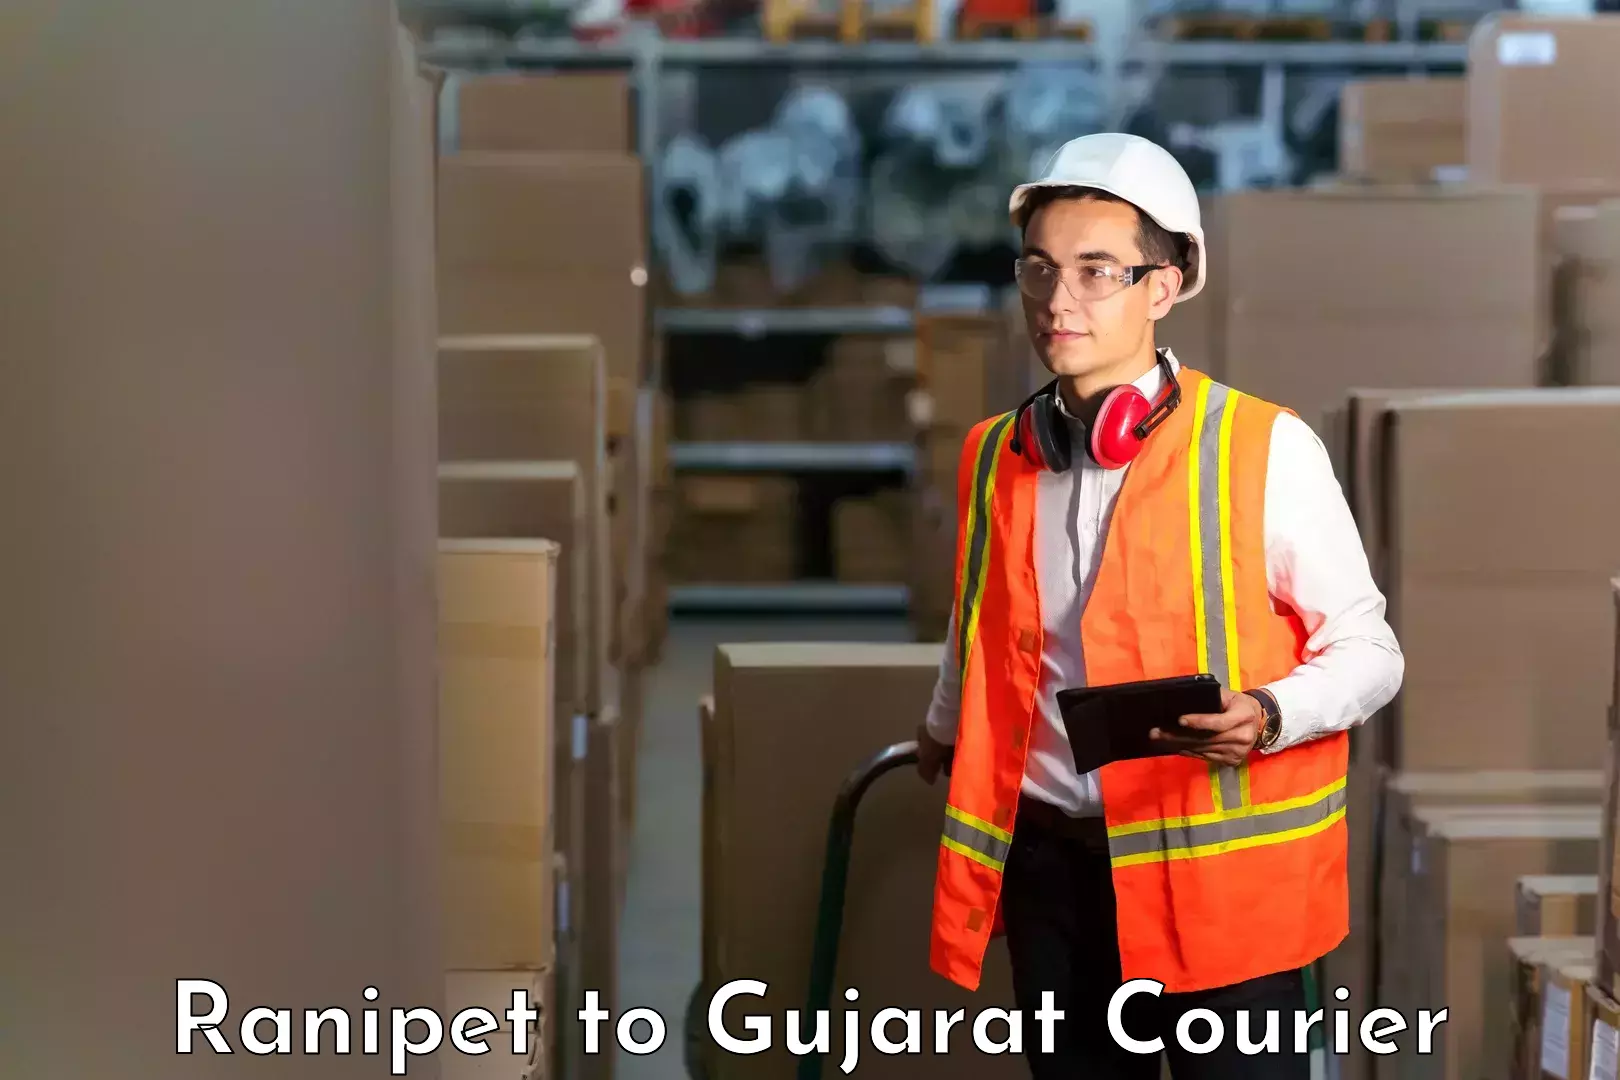 Reliable delivery network Ranipet to Surat